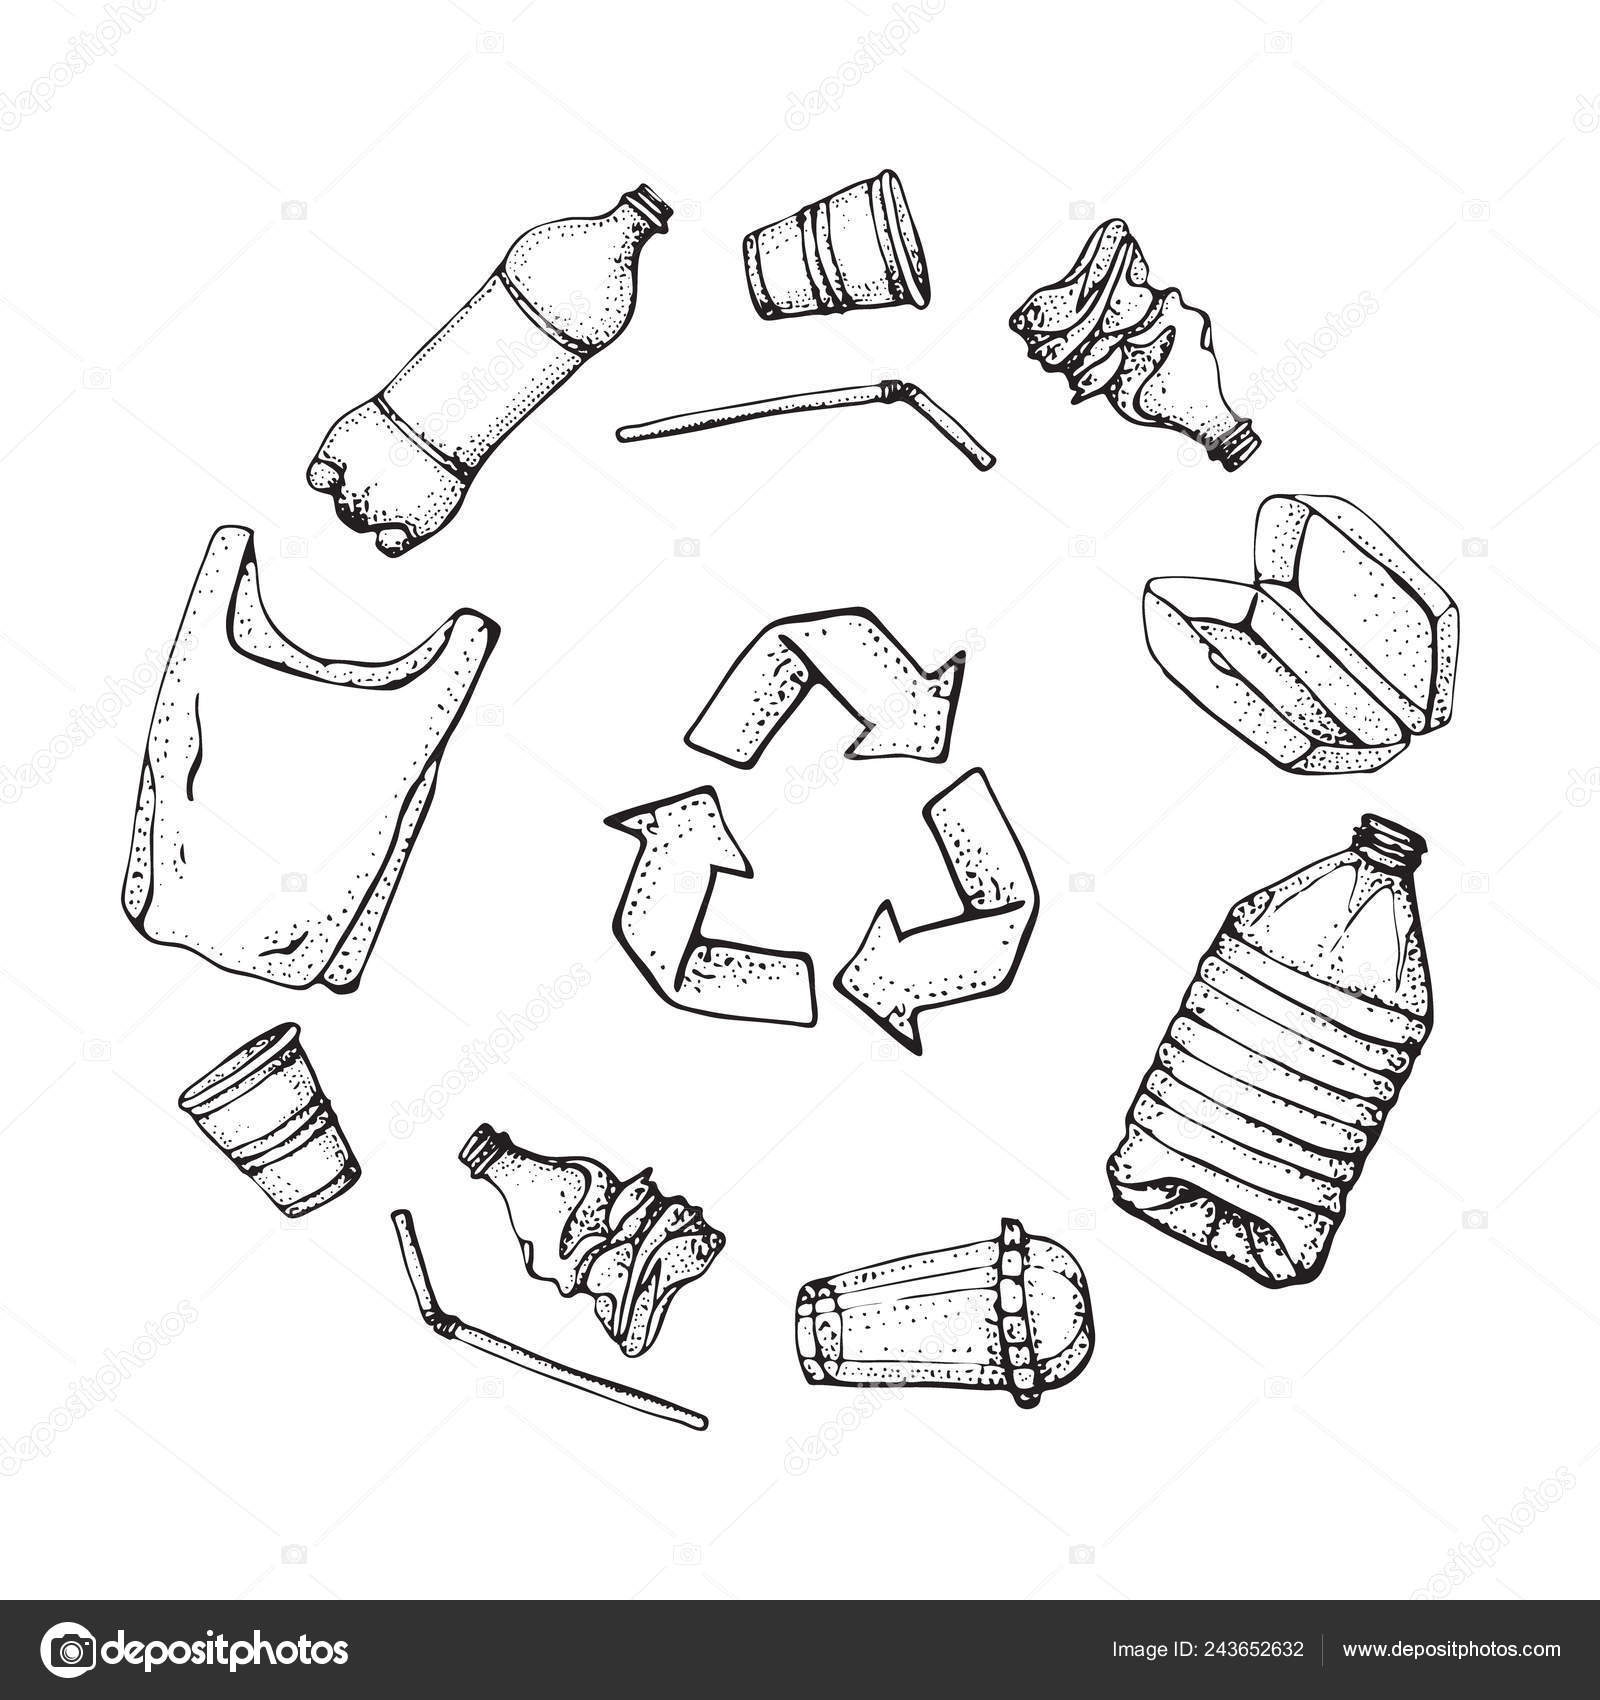 Stop Plastic Stock Illustrations, Cliparts and Royalty Free Stop Plastic  Vectors